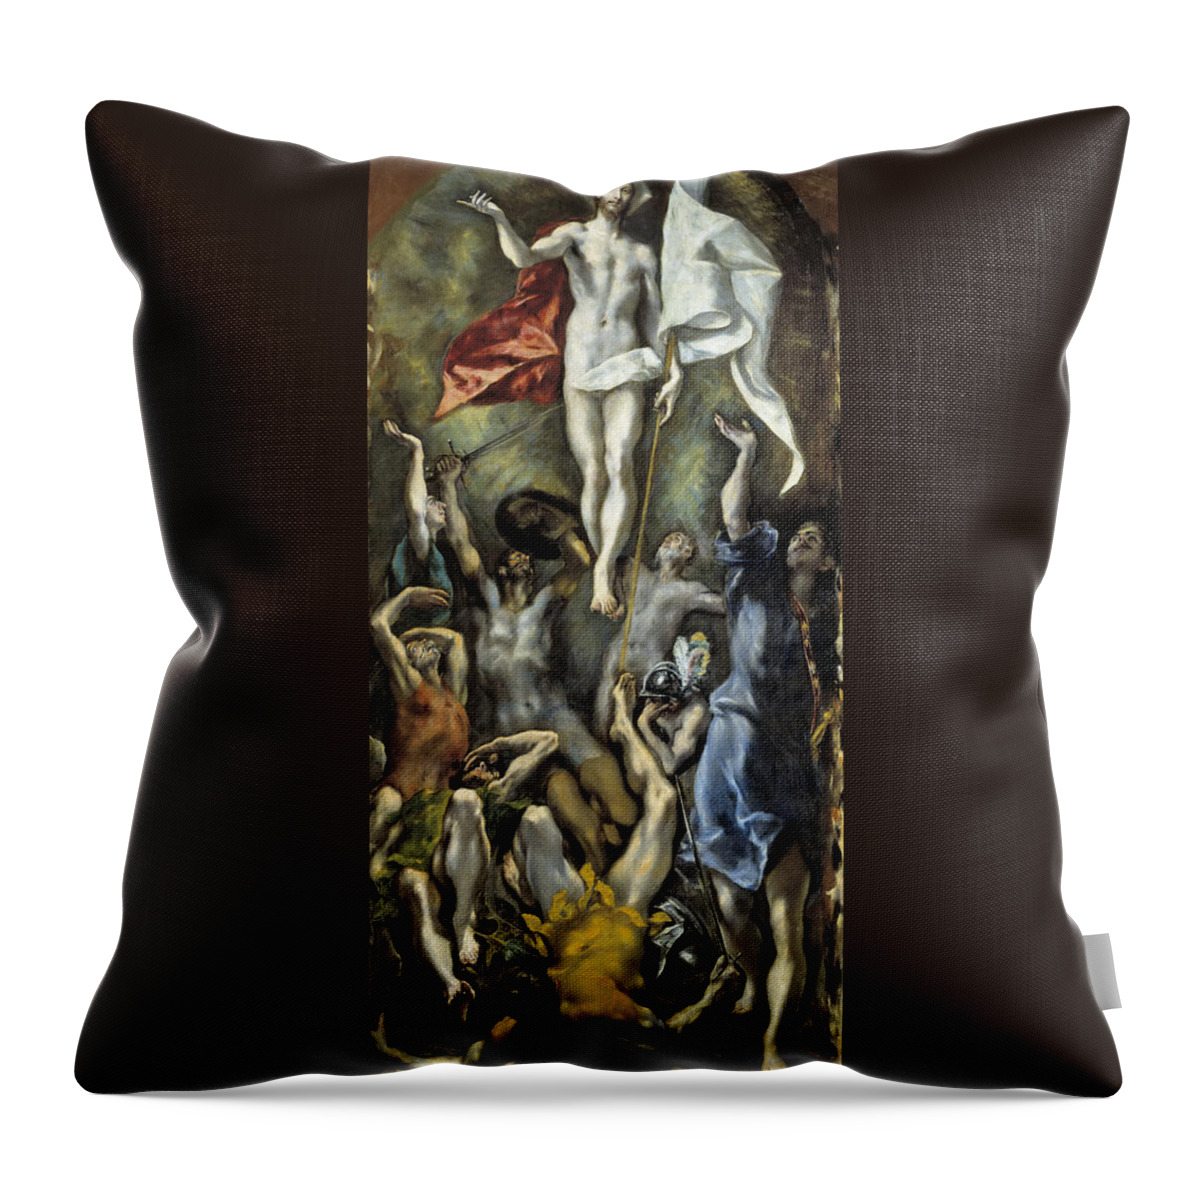 El Greco Throw Pillow featuring the painting The Resurrection by El Greco